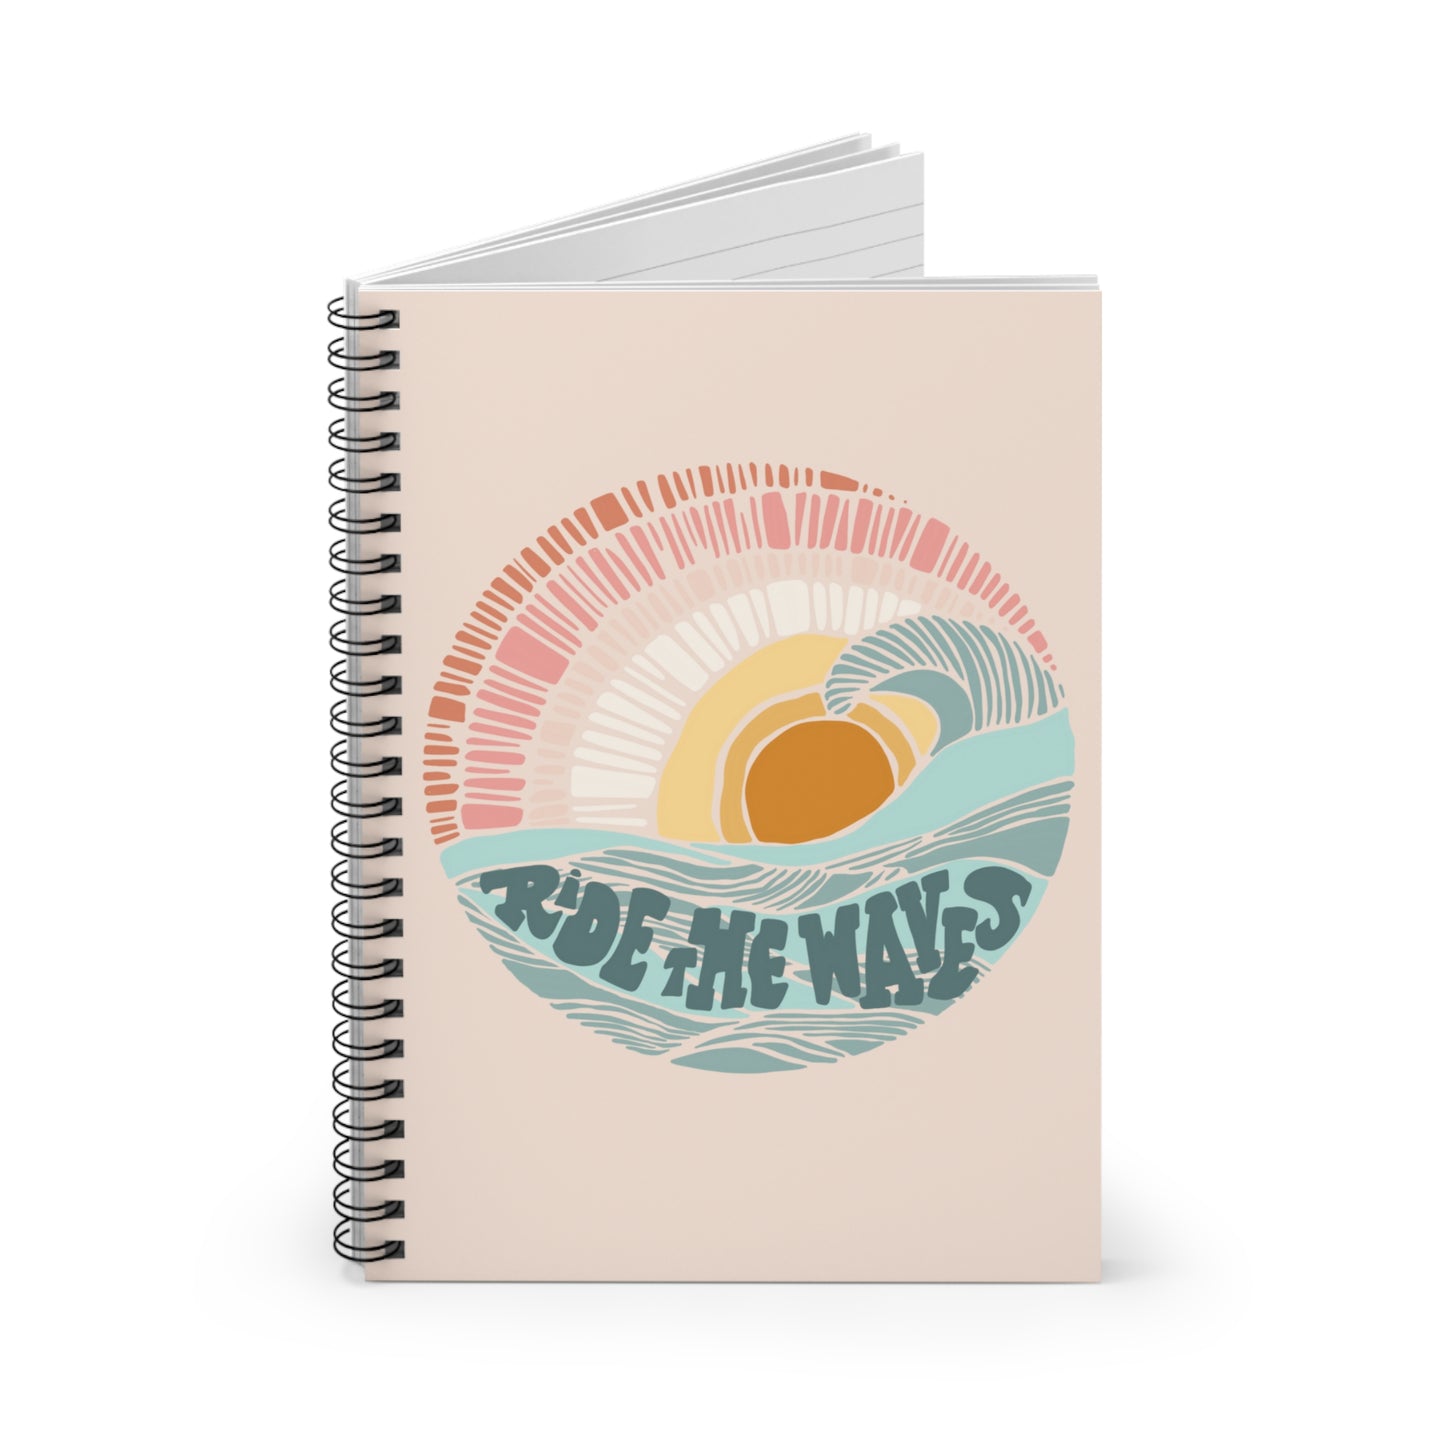 Ride the Waves Spiral Notebook - Ruled Line